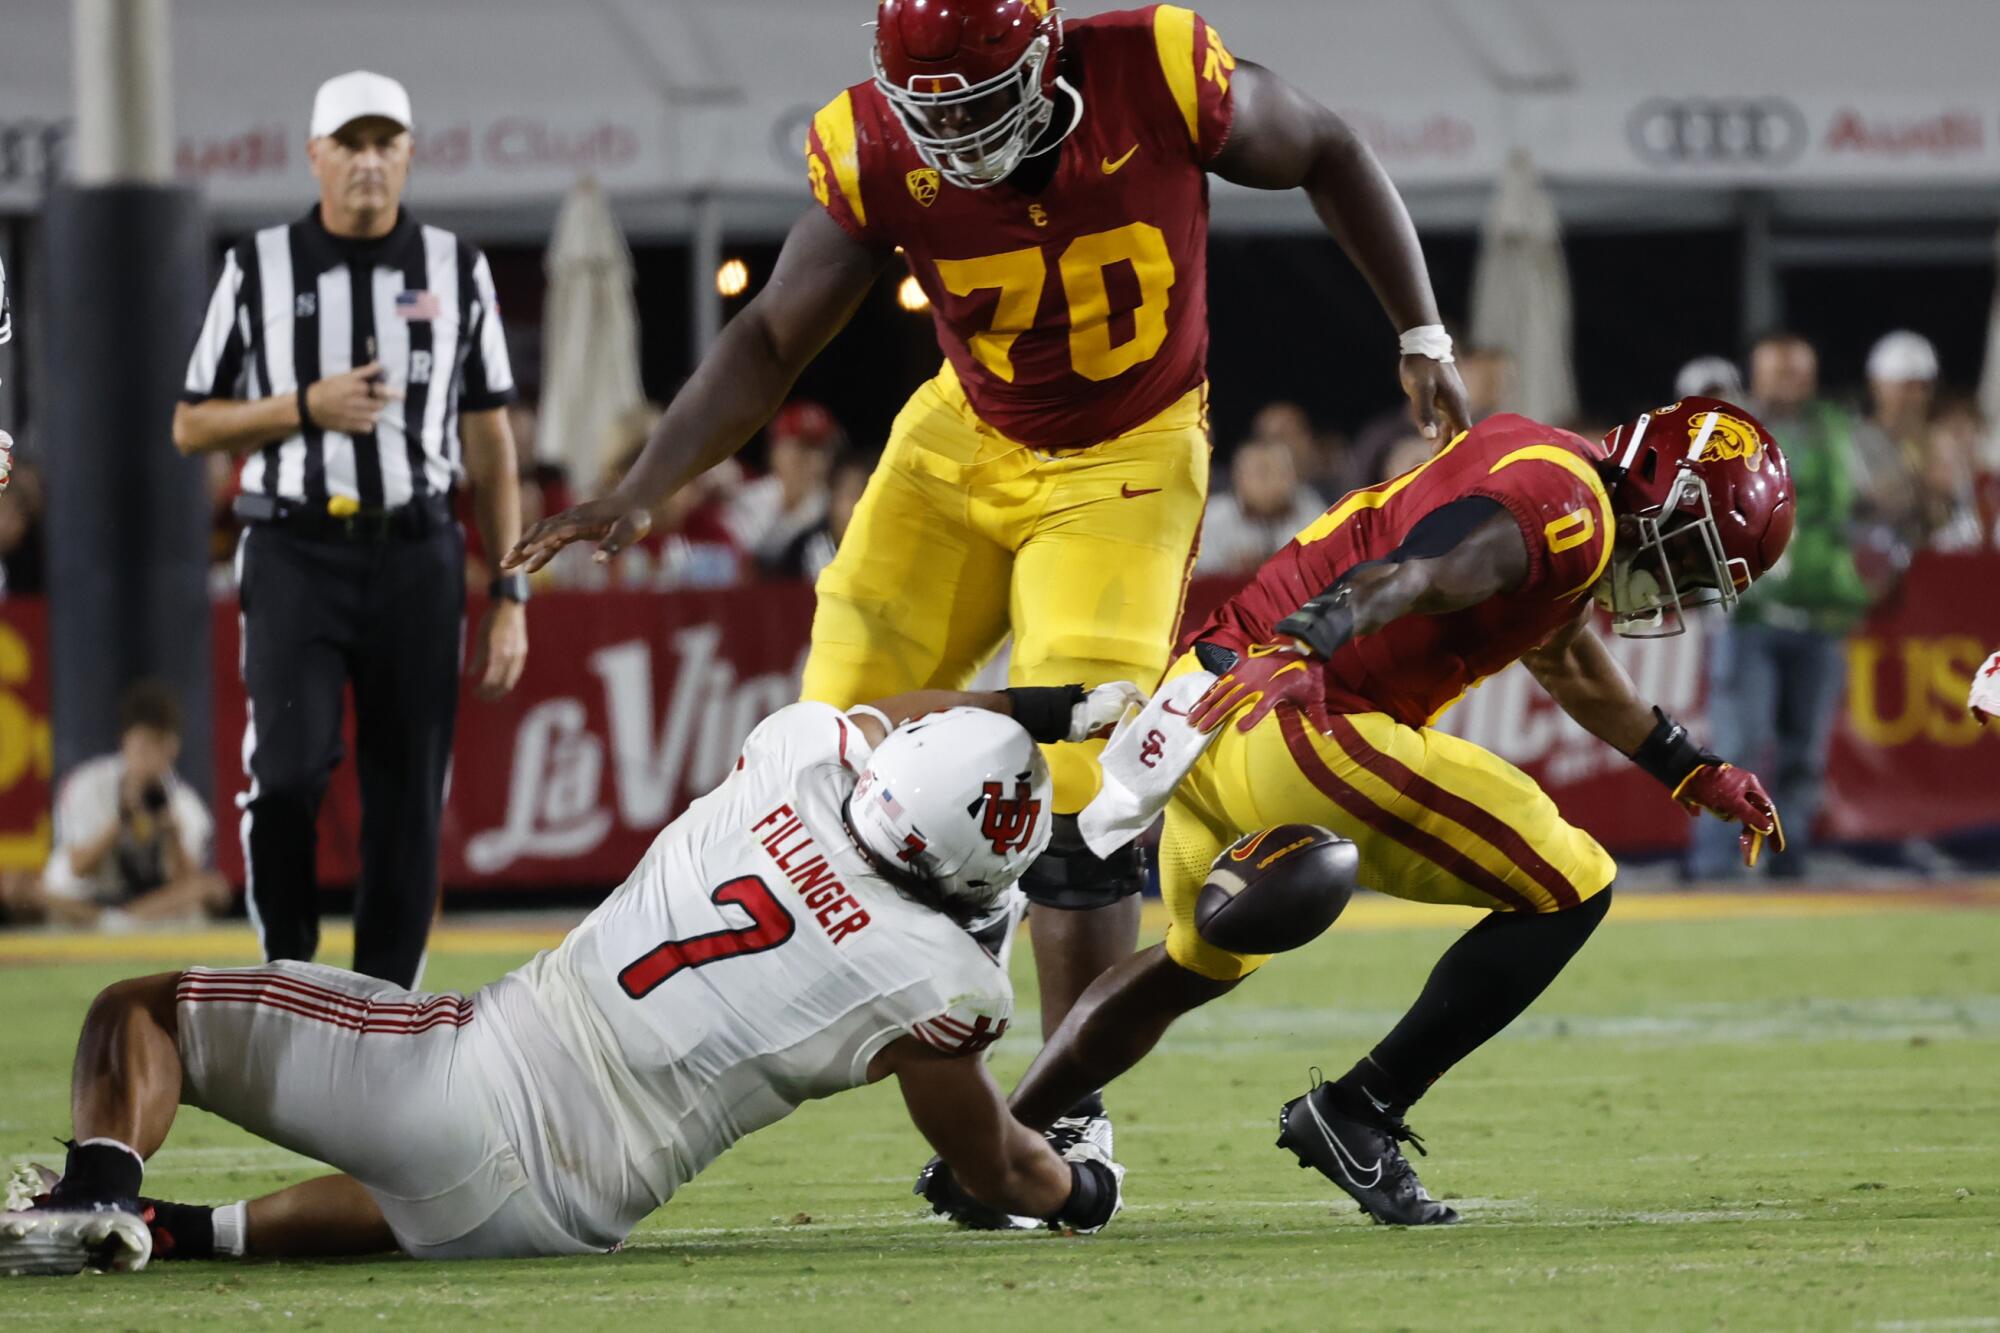 USC running back MarShawn Lloyd looks for the ball after it was stripped from him during a rushing play